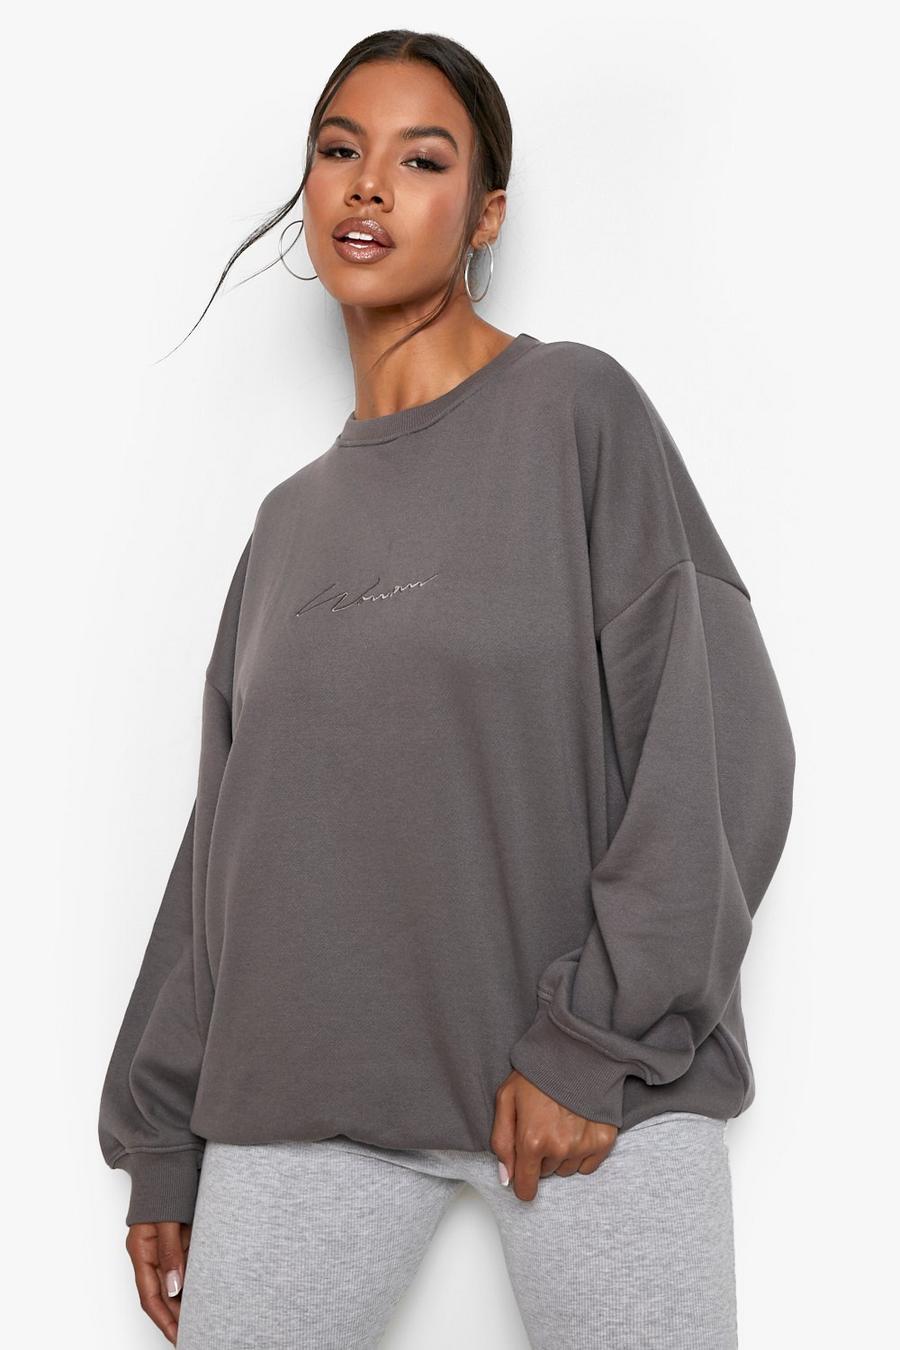 Charcoal grey Recycled Woman Embroidered Sweater